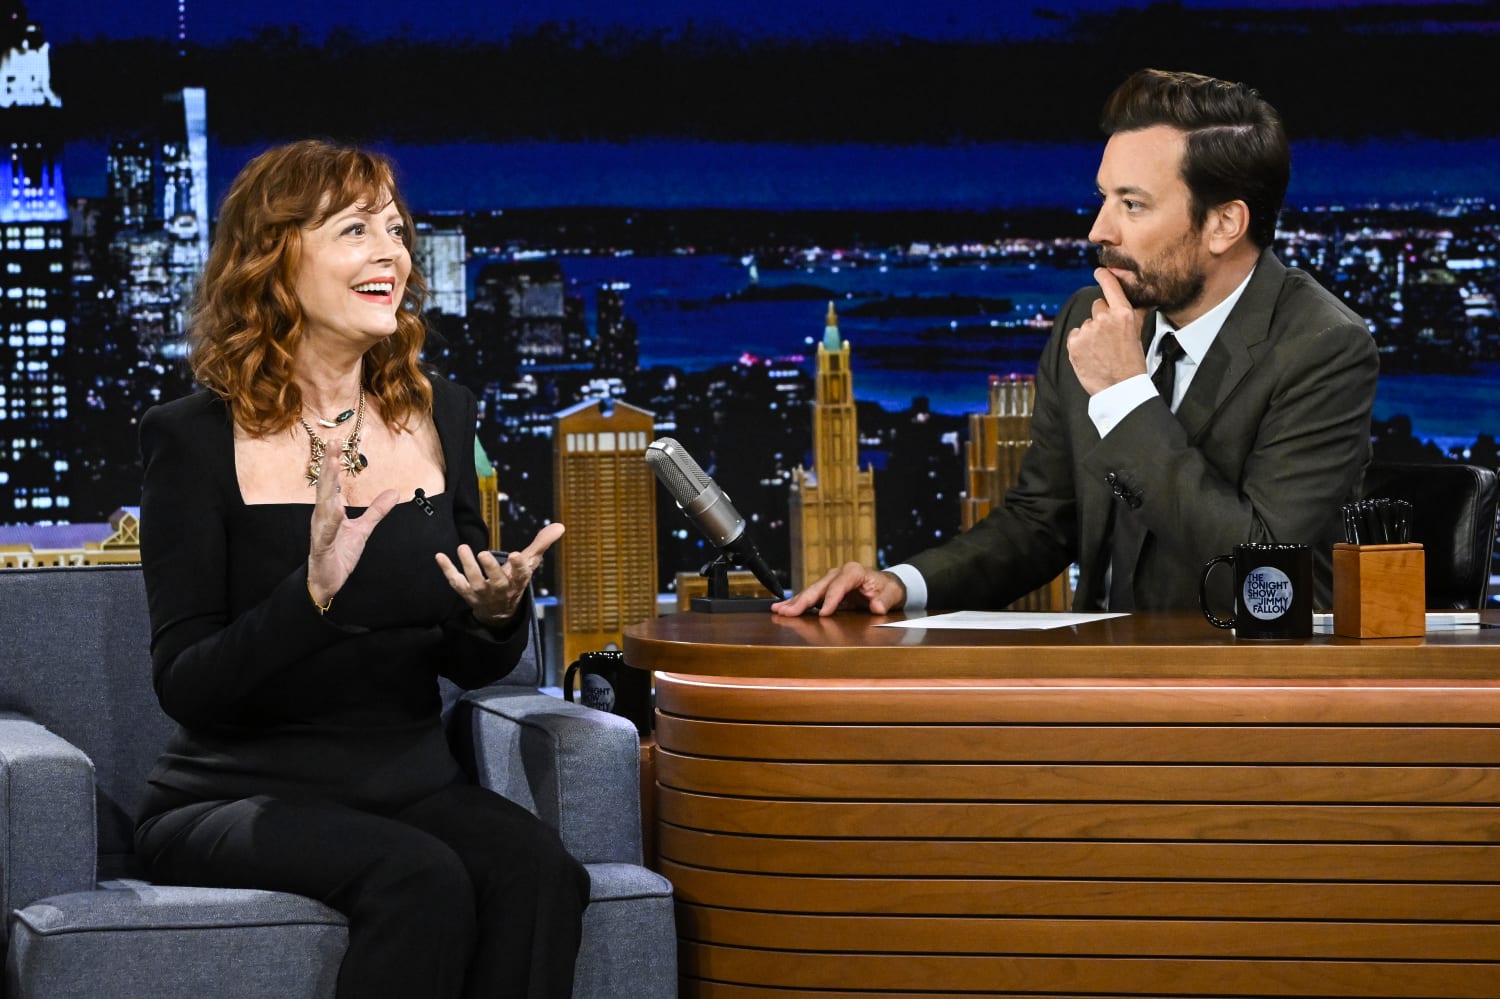 Susan Sarandon appears to come out as bisexual — again pic